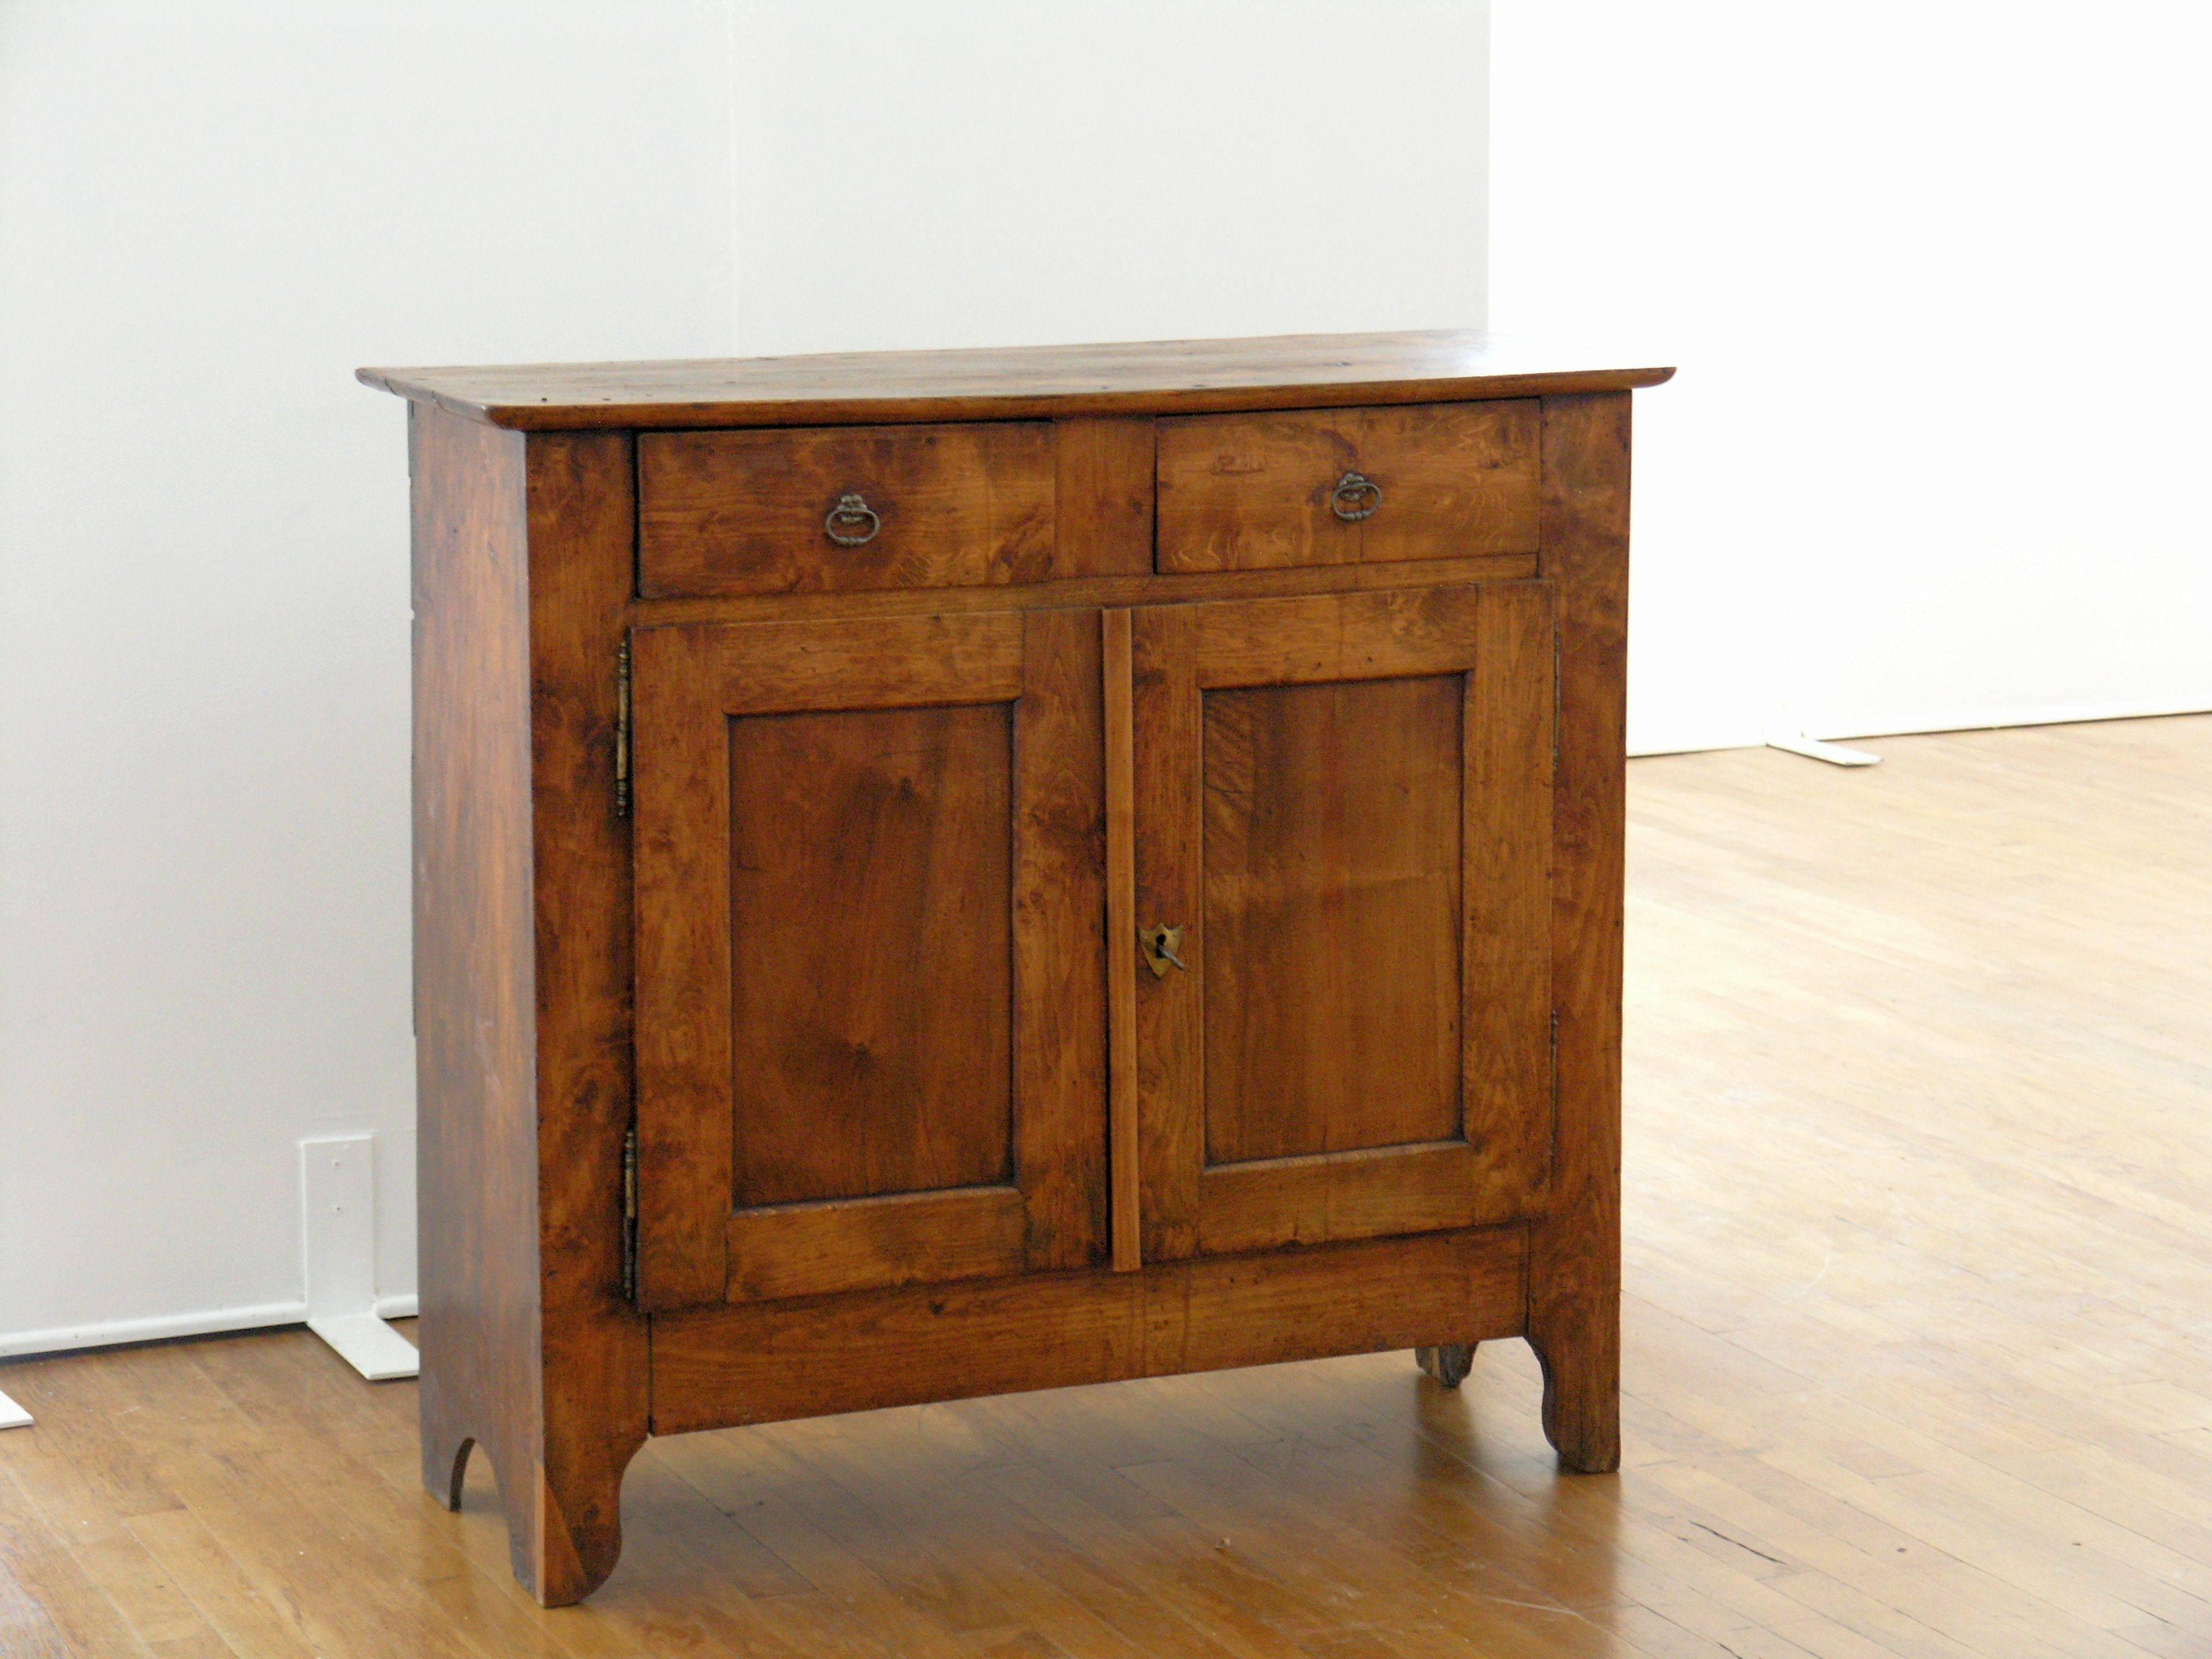 Rectangular top with molded edge over two drawers above two paneled doors raised on brackets feet.